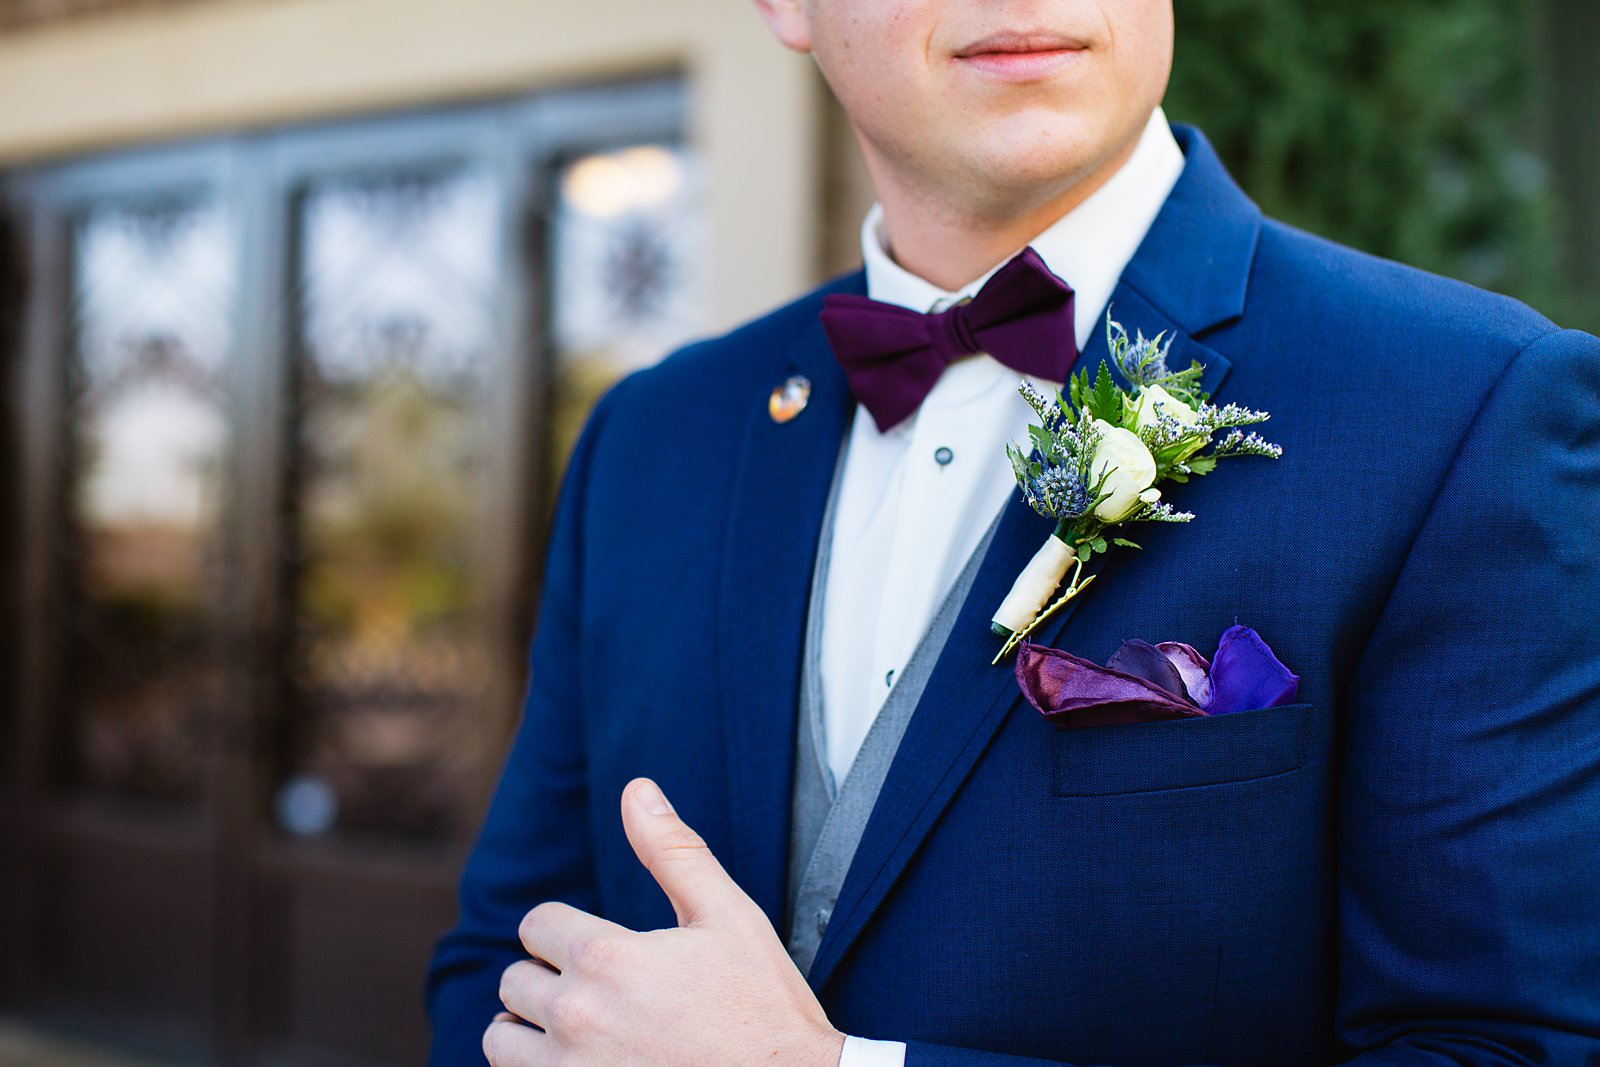 Detail image of groom's boutonniere while he is getting ready for his wedding day by Phoenix wedding photographers PMA Photography.